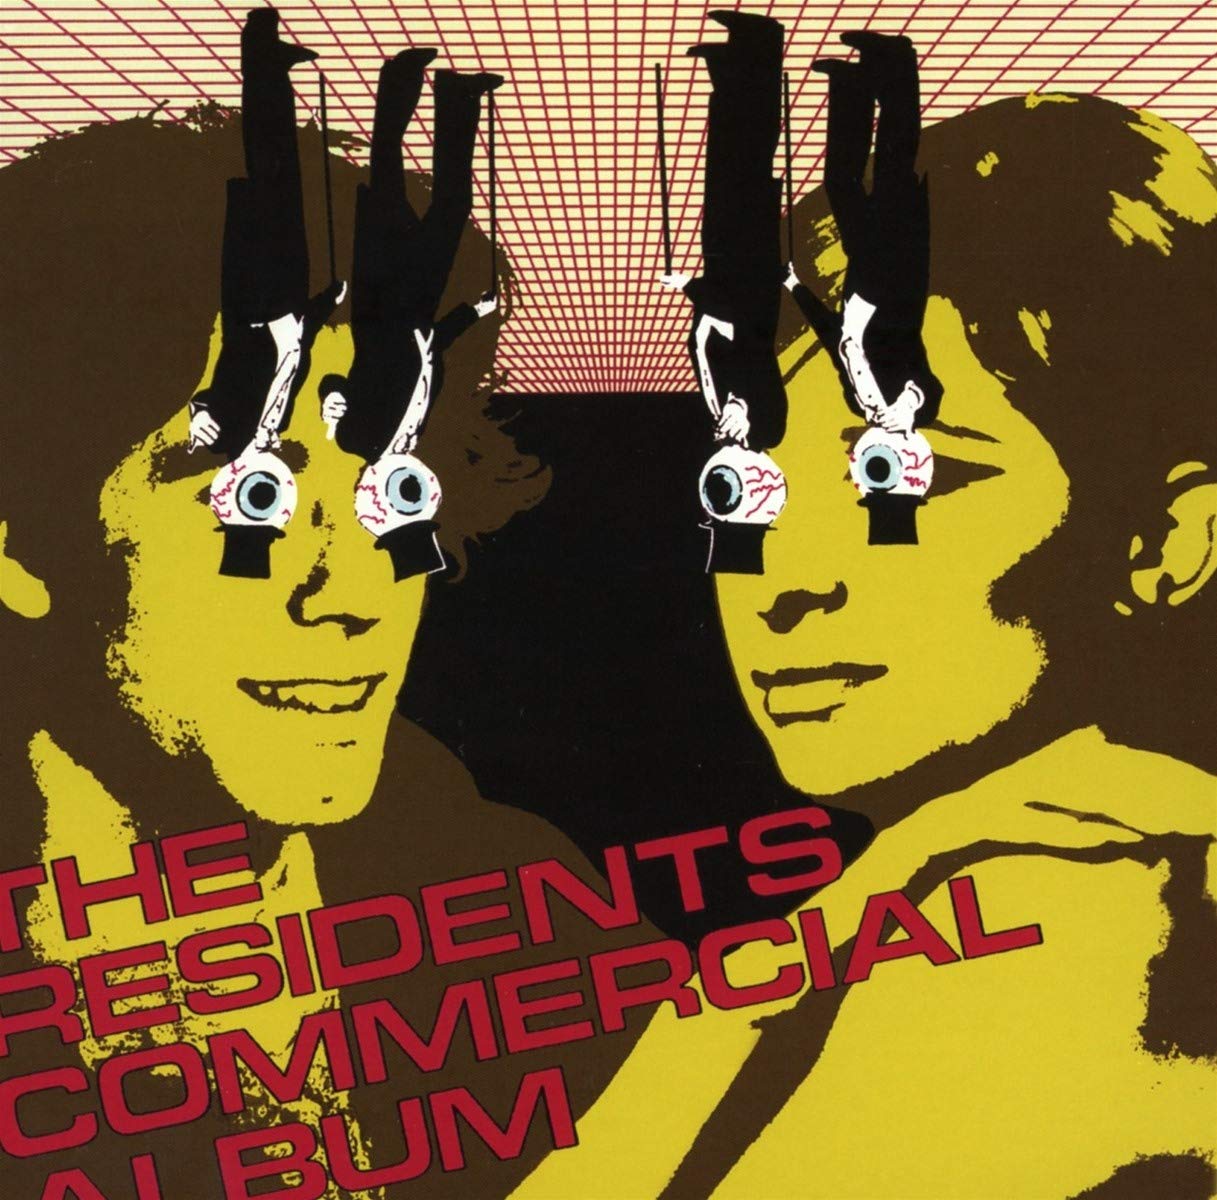 The Residents - Commercial Album - 2CD